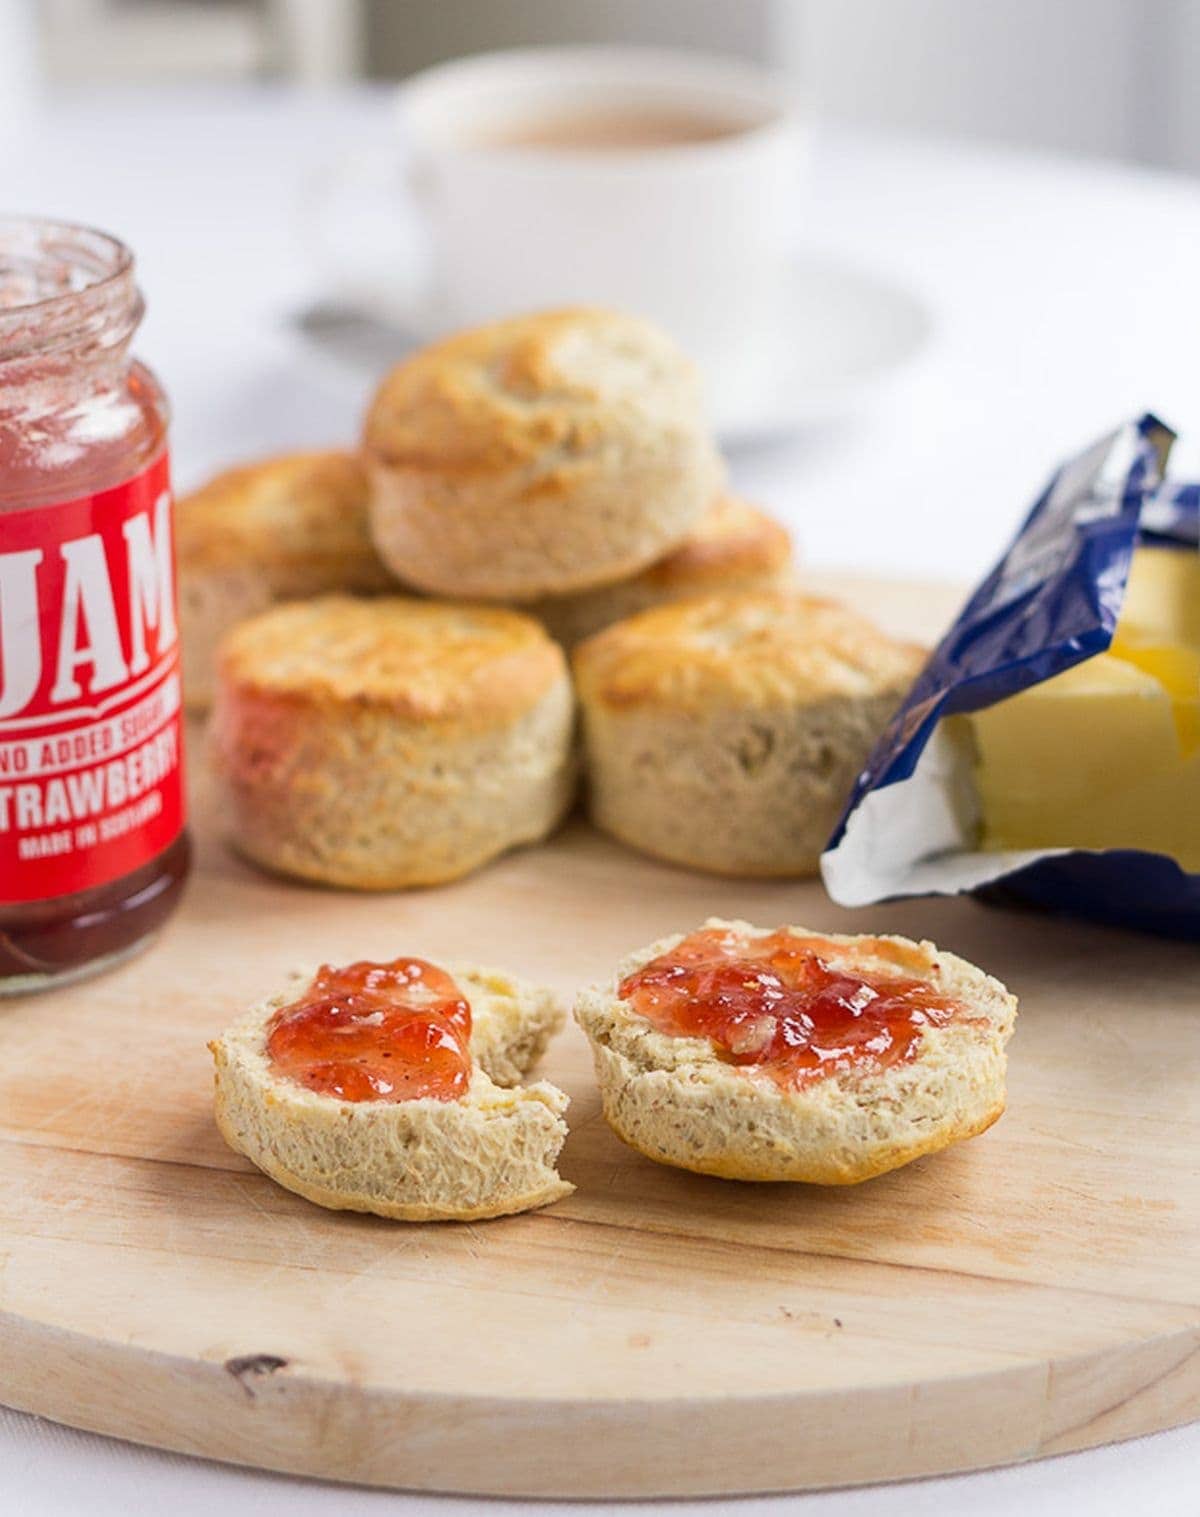 A Scottish bran scone cut in half and covered with butter and jam on a chopping board. More scones in the background as well as a jar of jam, block of butter and a cup of tea.